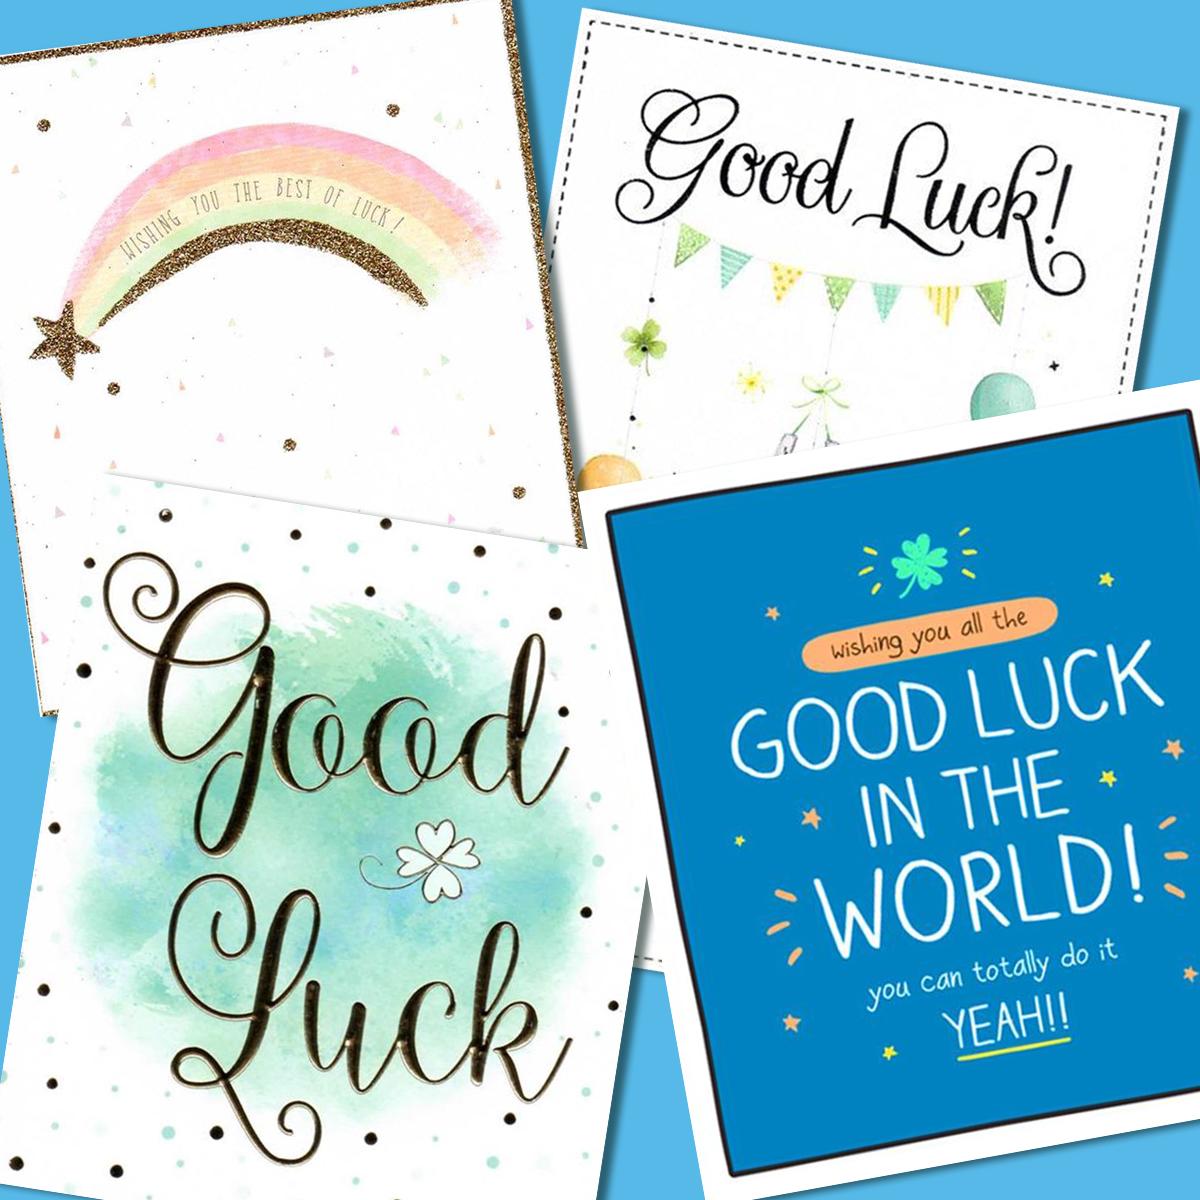 A Selection Of Cards To Show The Depth Of Range In Our Good Luck Section